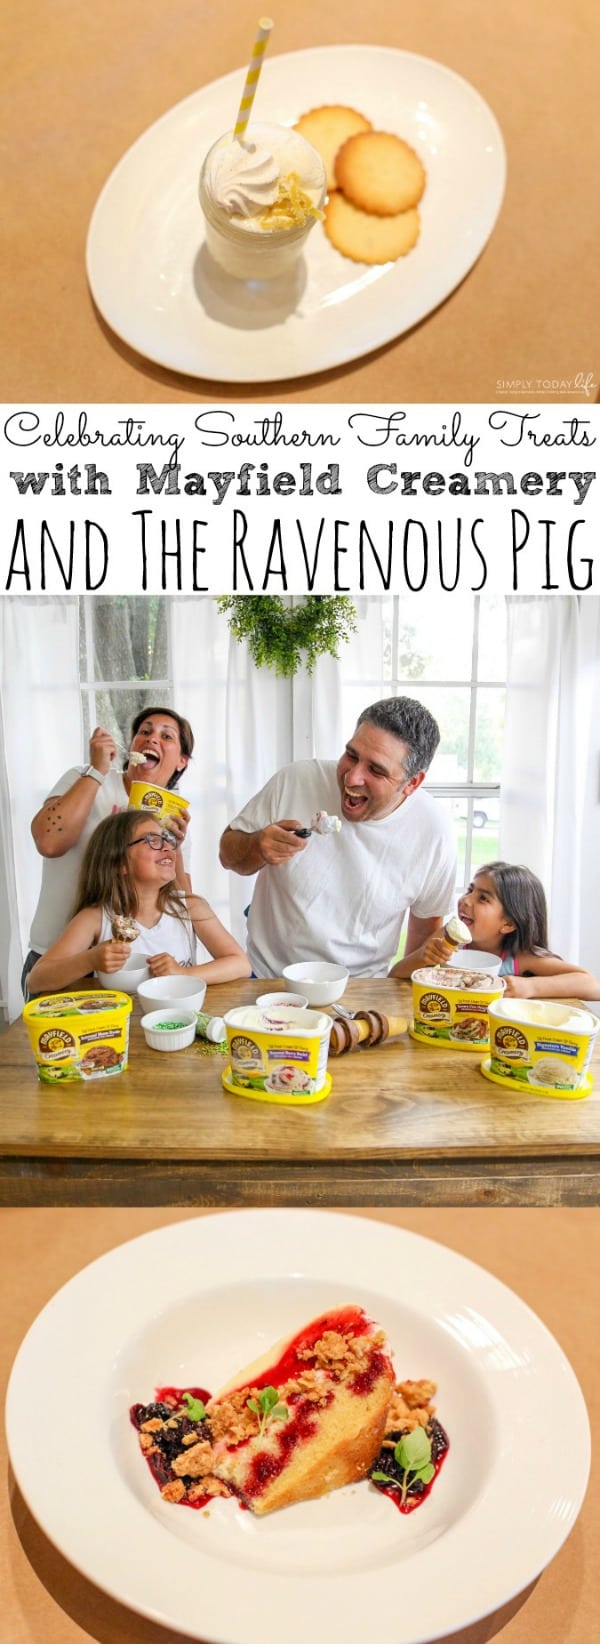 Celebrating Southern Family Treats With Mayfield Creamery and The Ravenous Pig - simplytodaylife.com